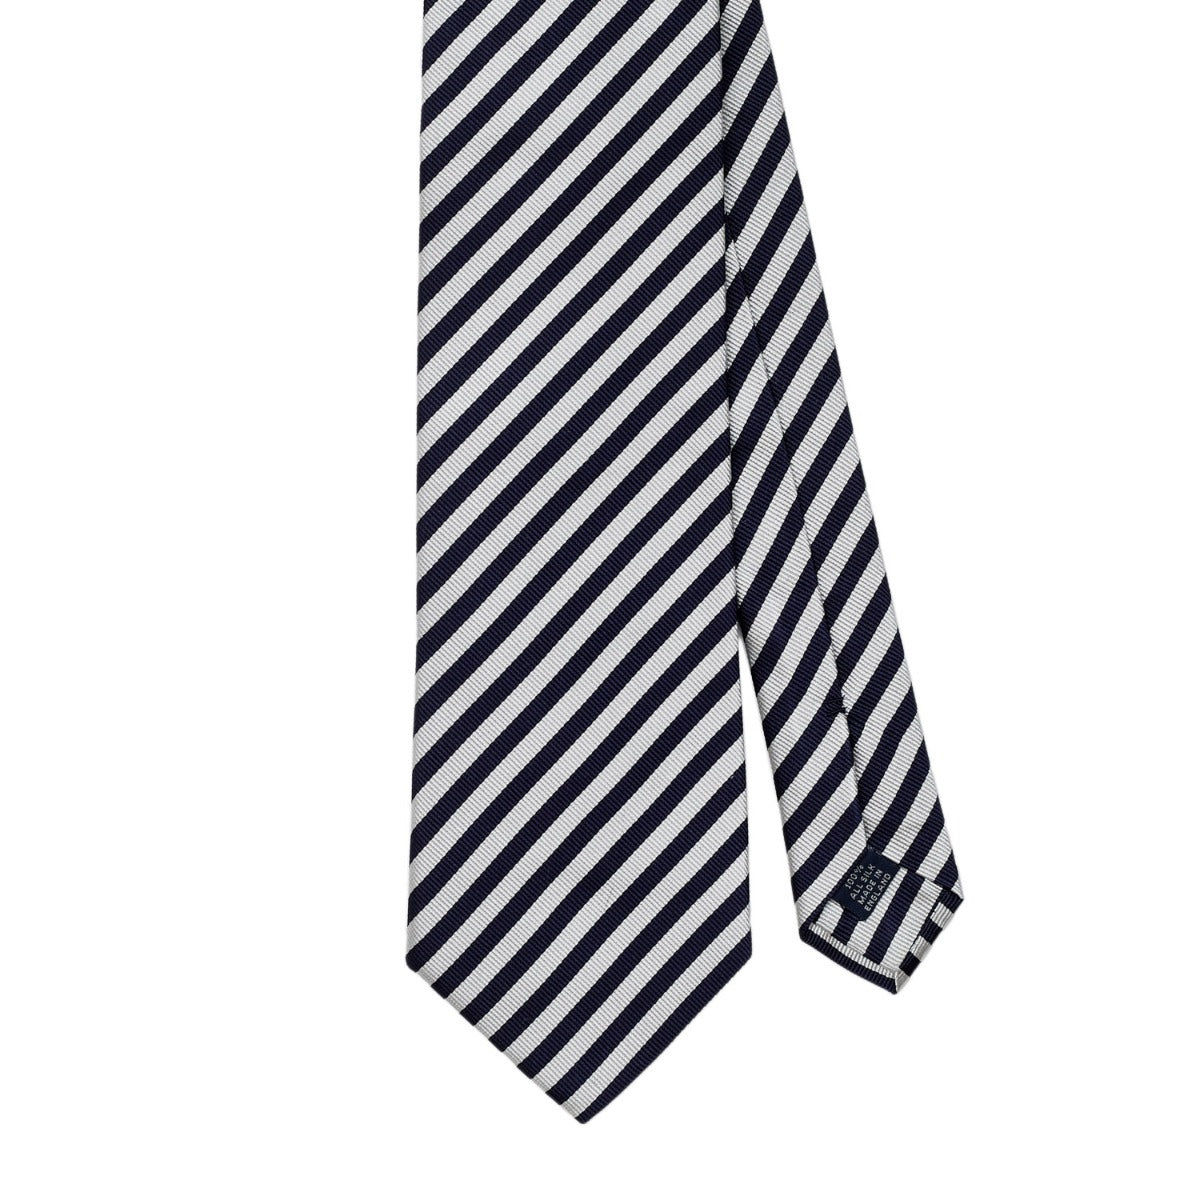 A Sovereign Grade Navy and Silver London Stripe Silk Tie by KirbyAllison.com on a white background.